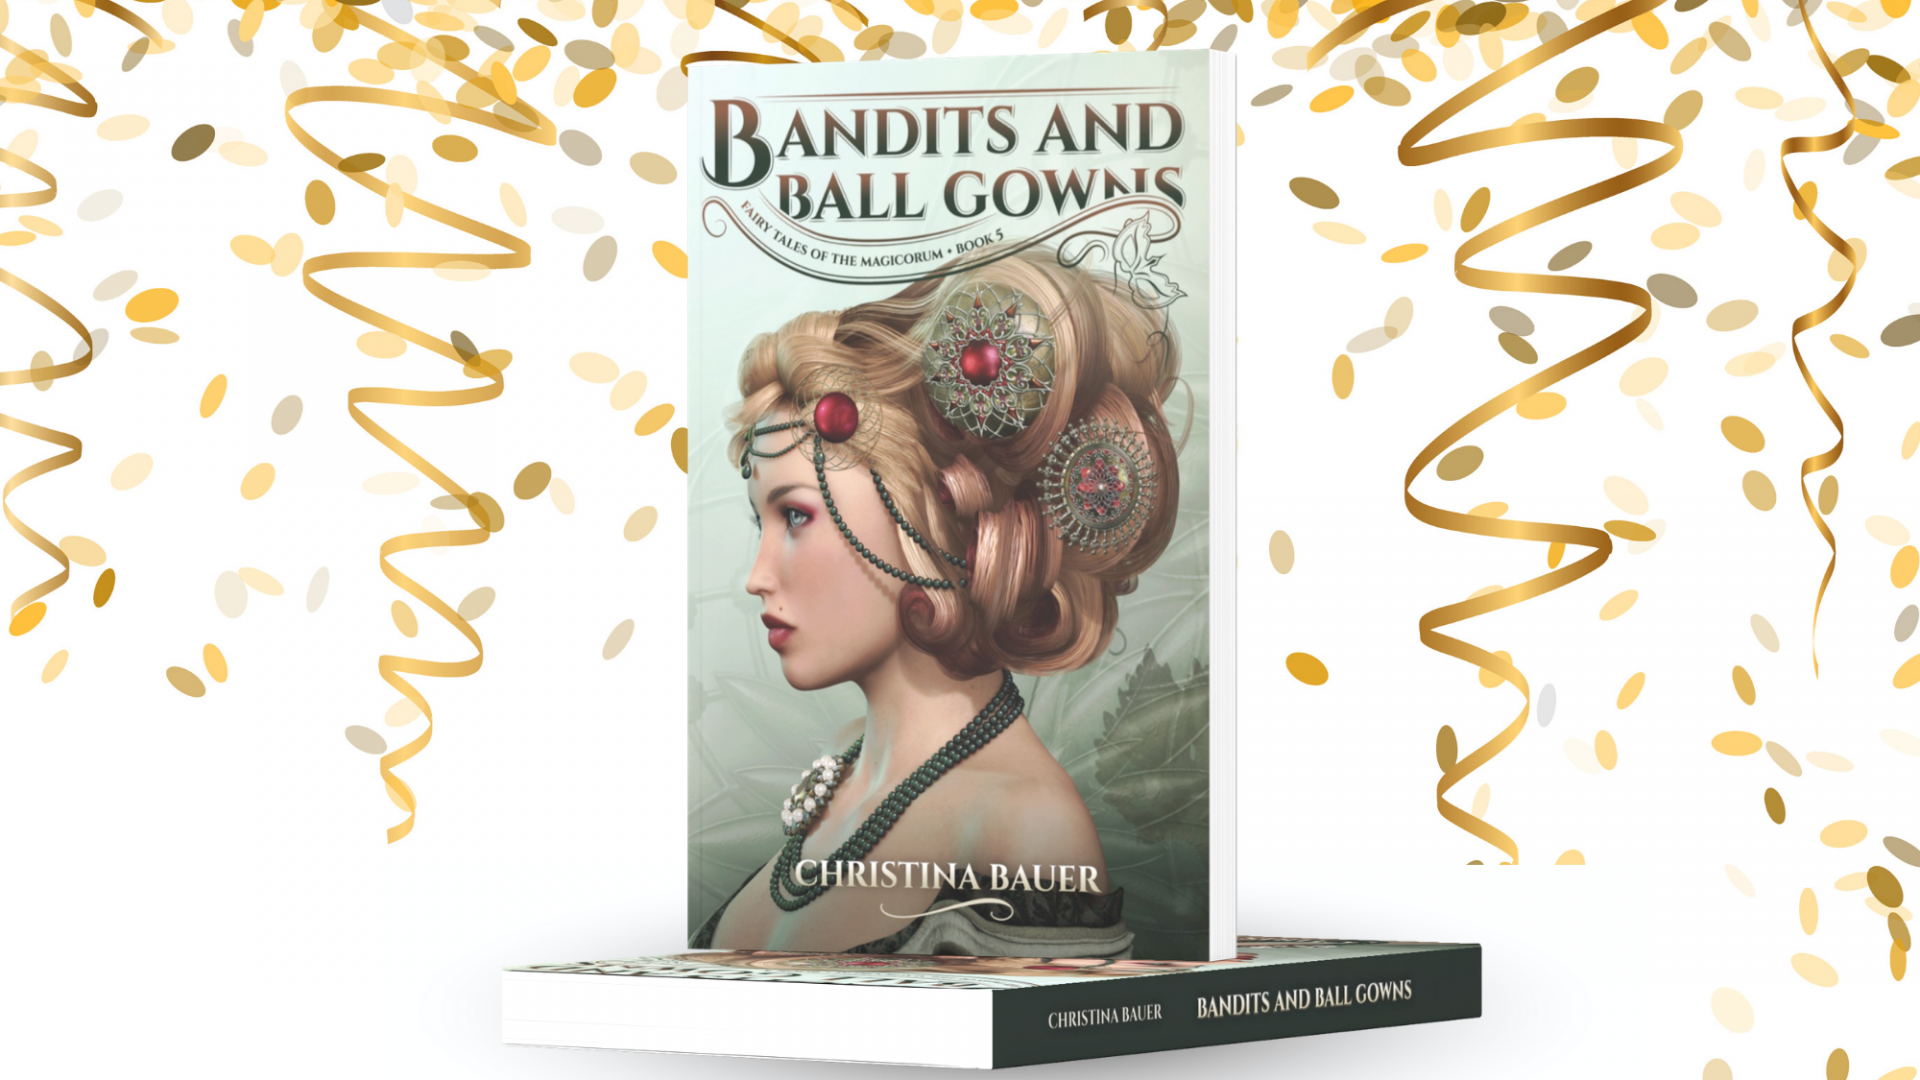 Happy Book Birthday, BANDITS AND BALL GOWNS!